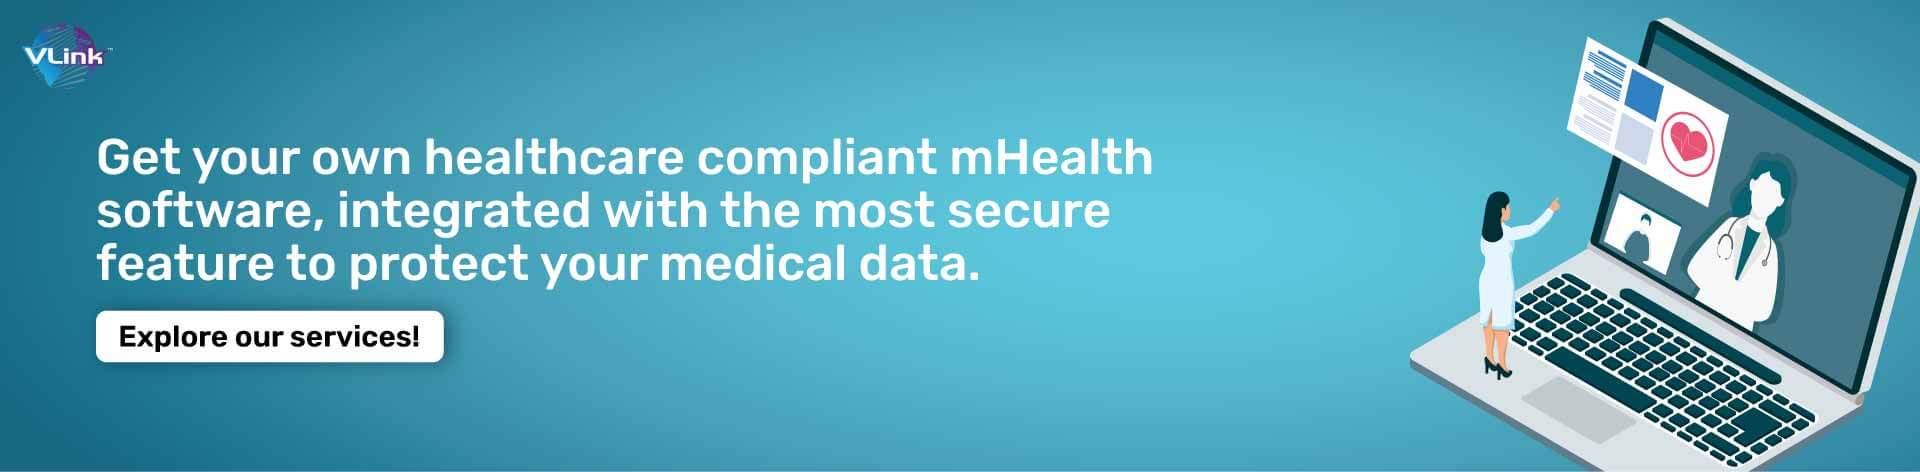 mhealth_software_adheres_to_healthcare_compliance_cta